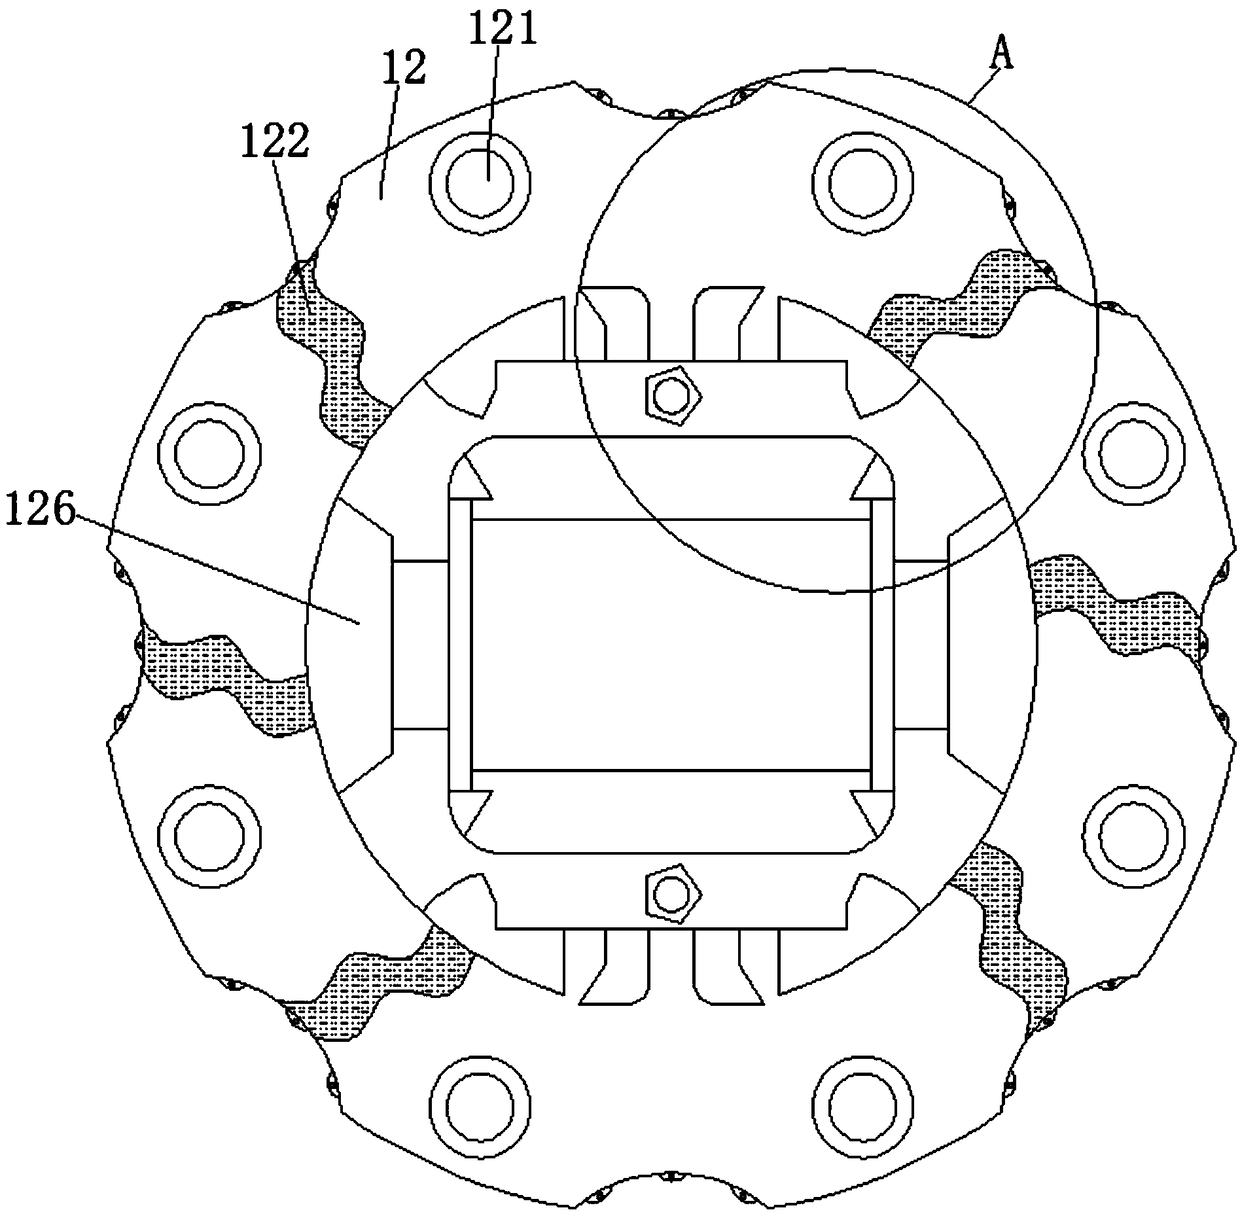 Stop-loss-based air conditioner shell injection mold capable of achieving flexible operation